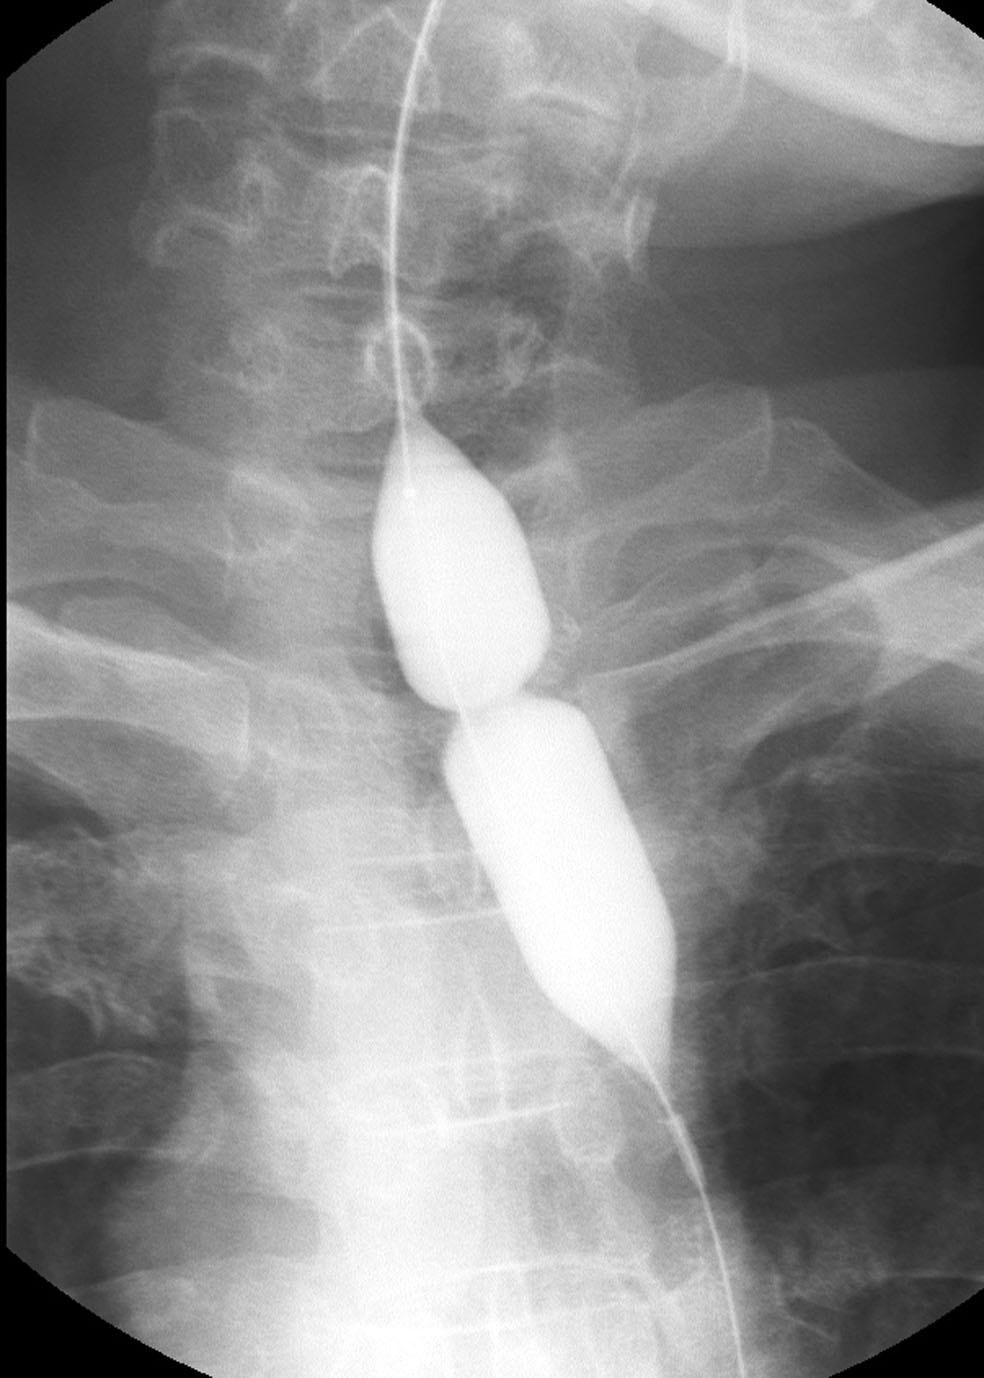 20-mm-diameter balloon is placed and is inflated until waist forms by stricture disappeared.